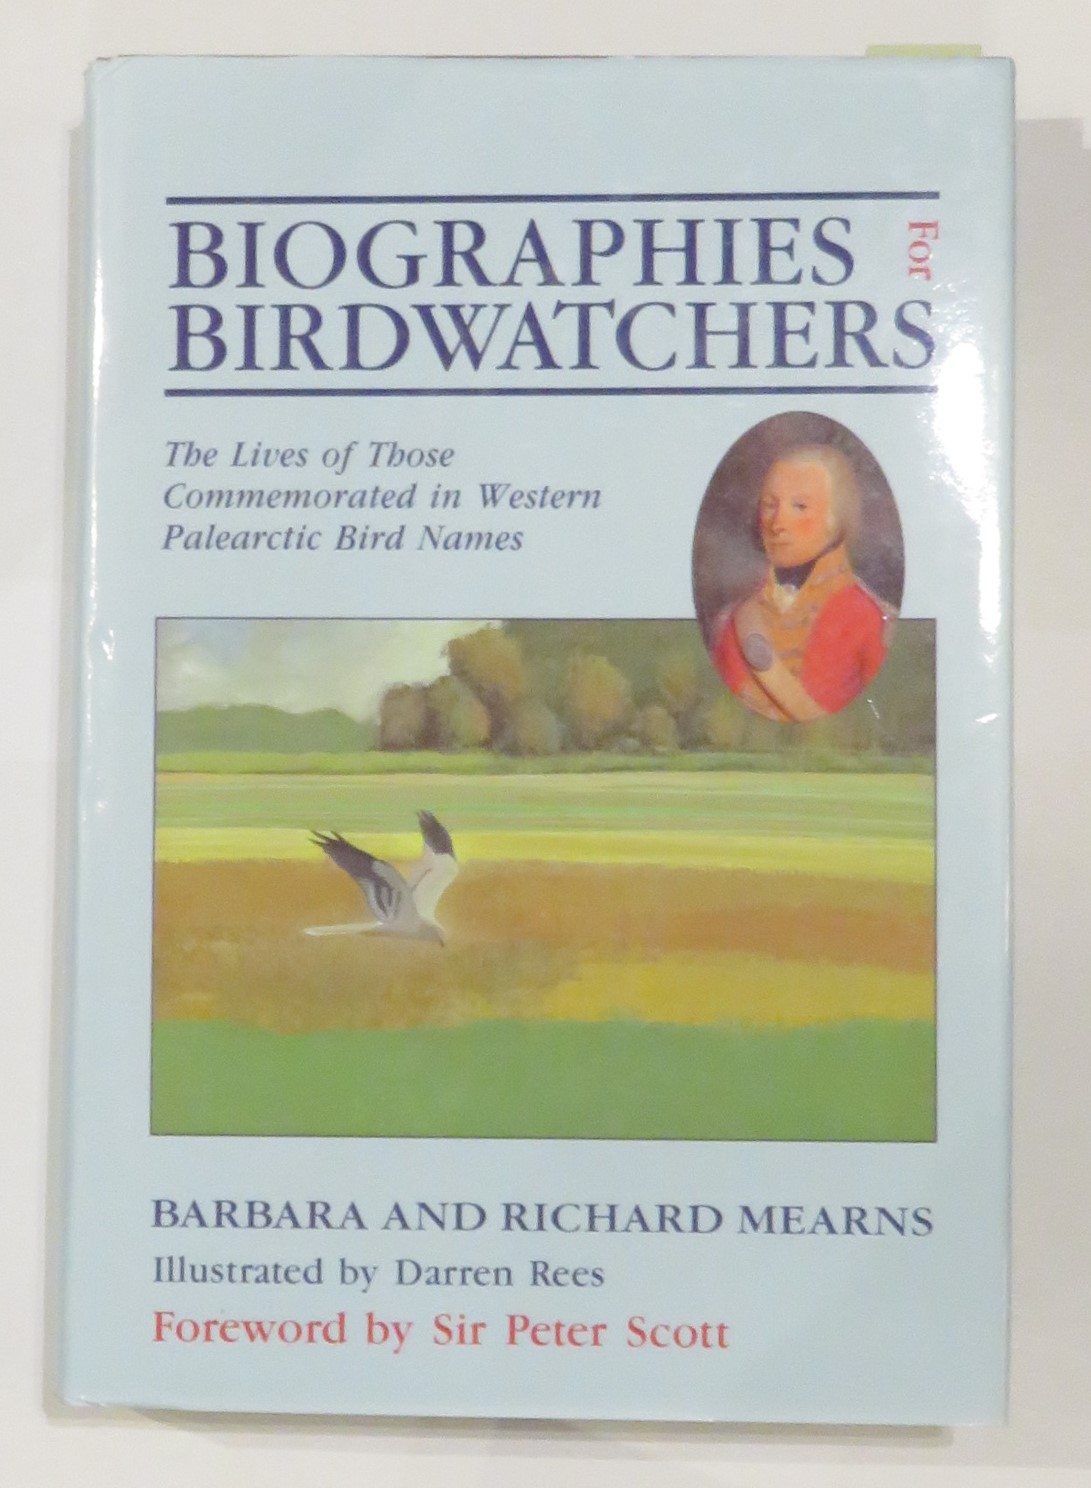 Biographies for Birdwatchers: The Lives of Those Commemorated in Western Palearctic Bird Names